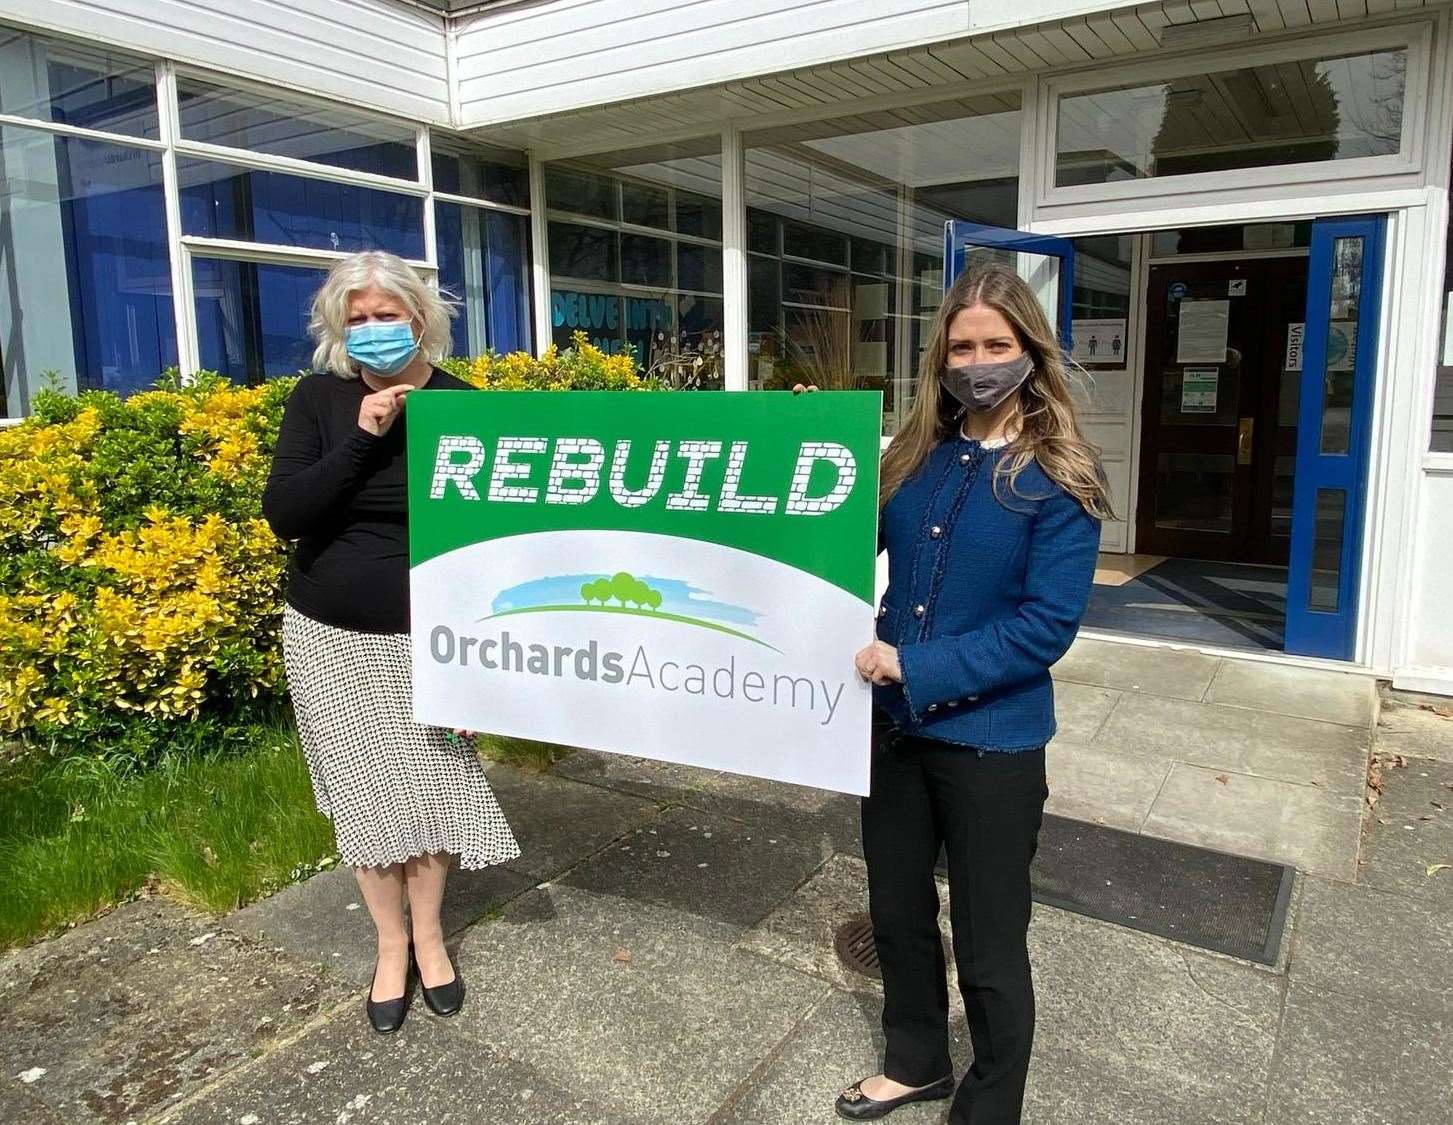 Orchards Academy head Natalie Willbourn and Sevenoaks MP Laura Trott at the launch of a petition to rebuild the school.